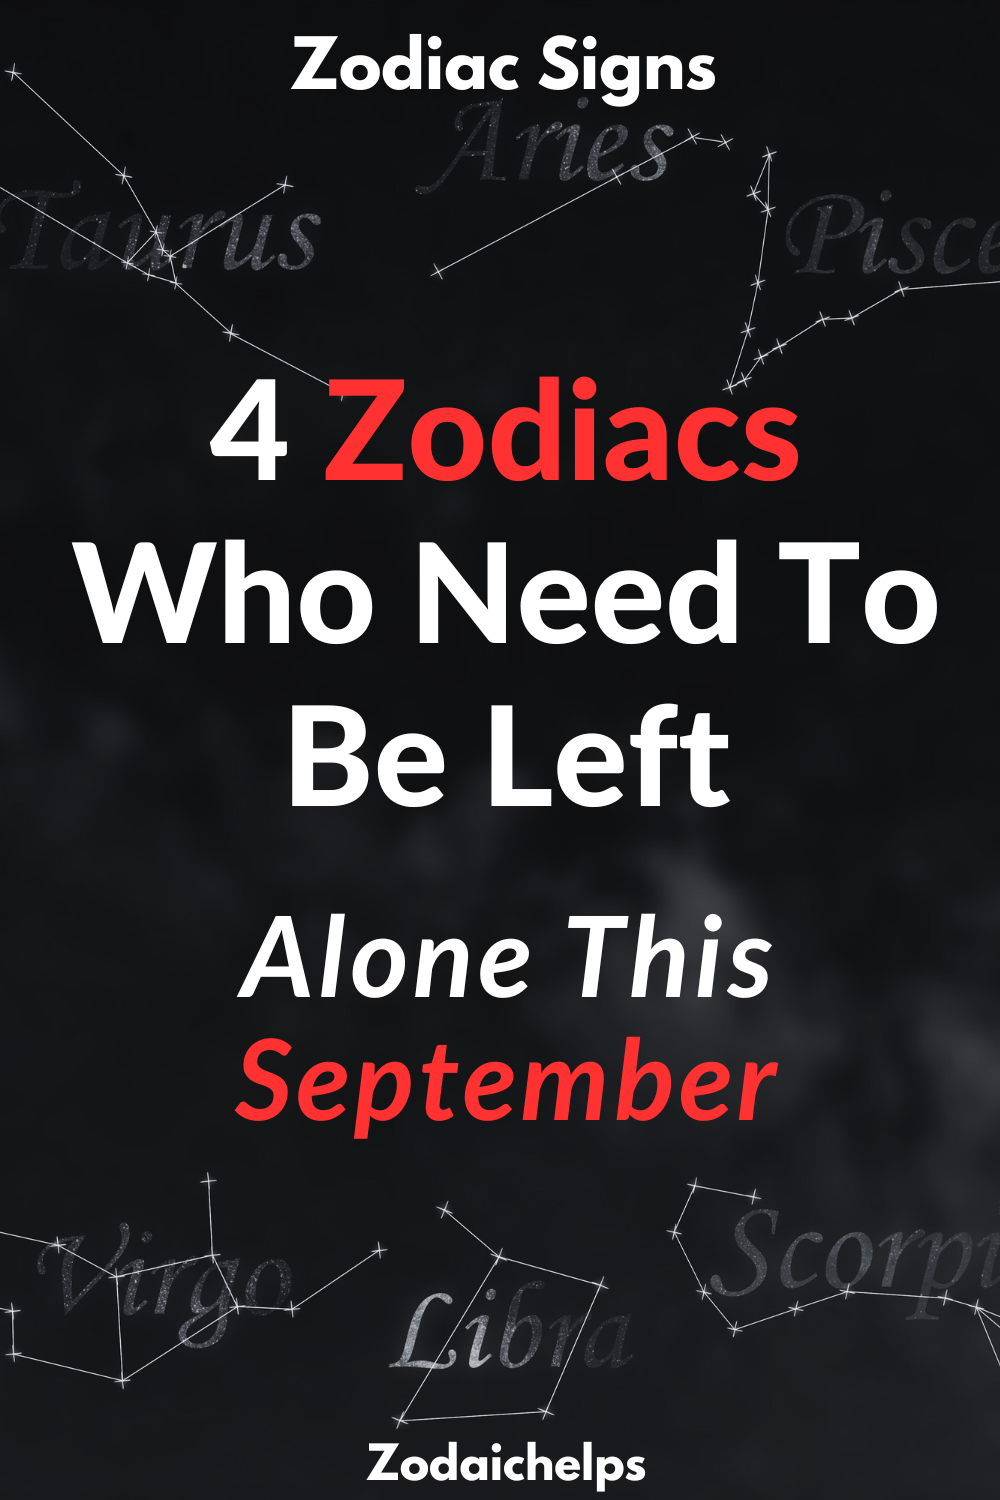 4 Zodiacs Who Need To Be Left Alone This September